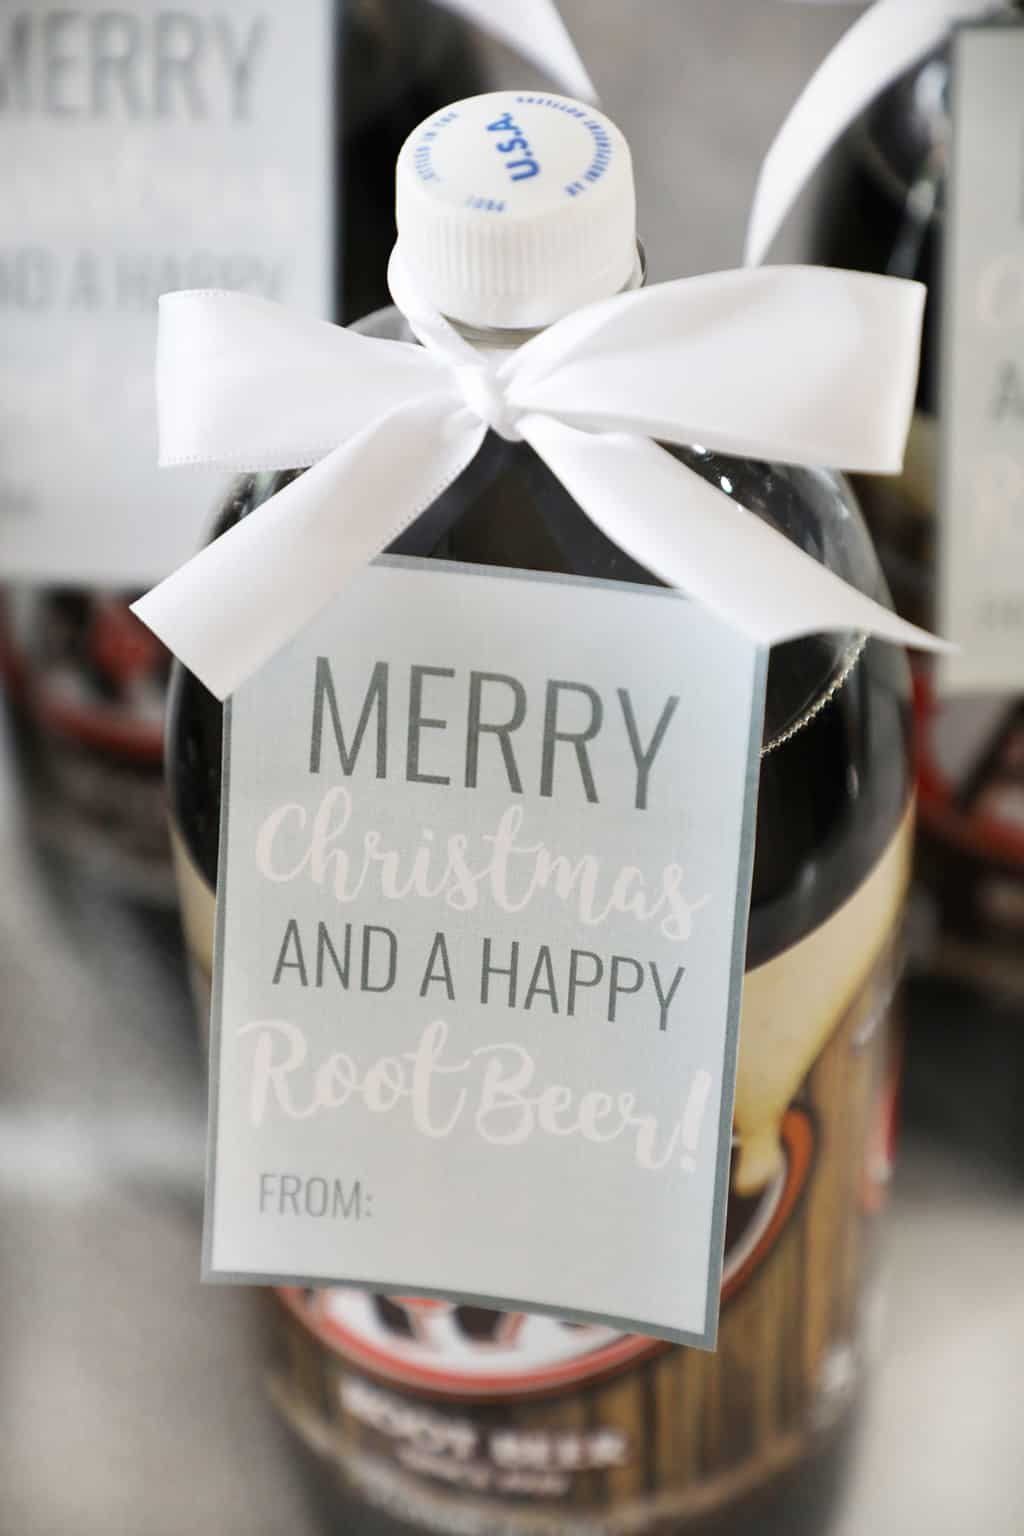 green gift tag on a two liter of rootbeer